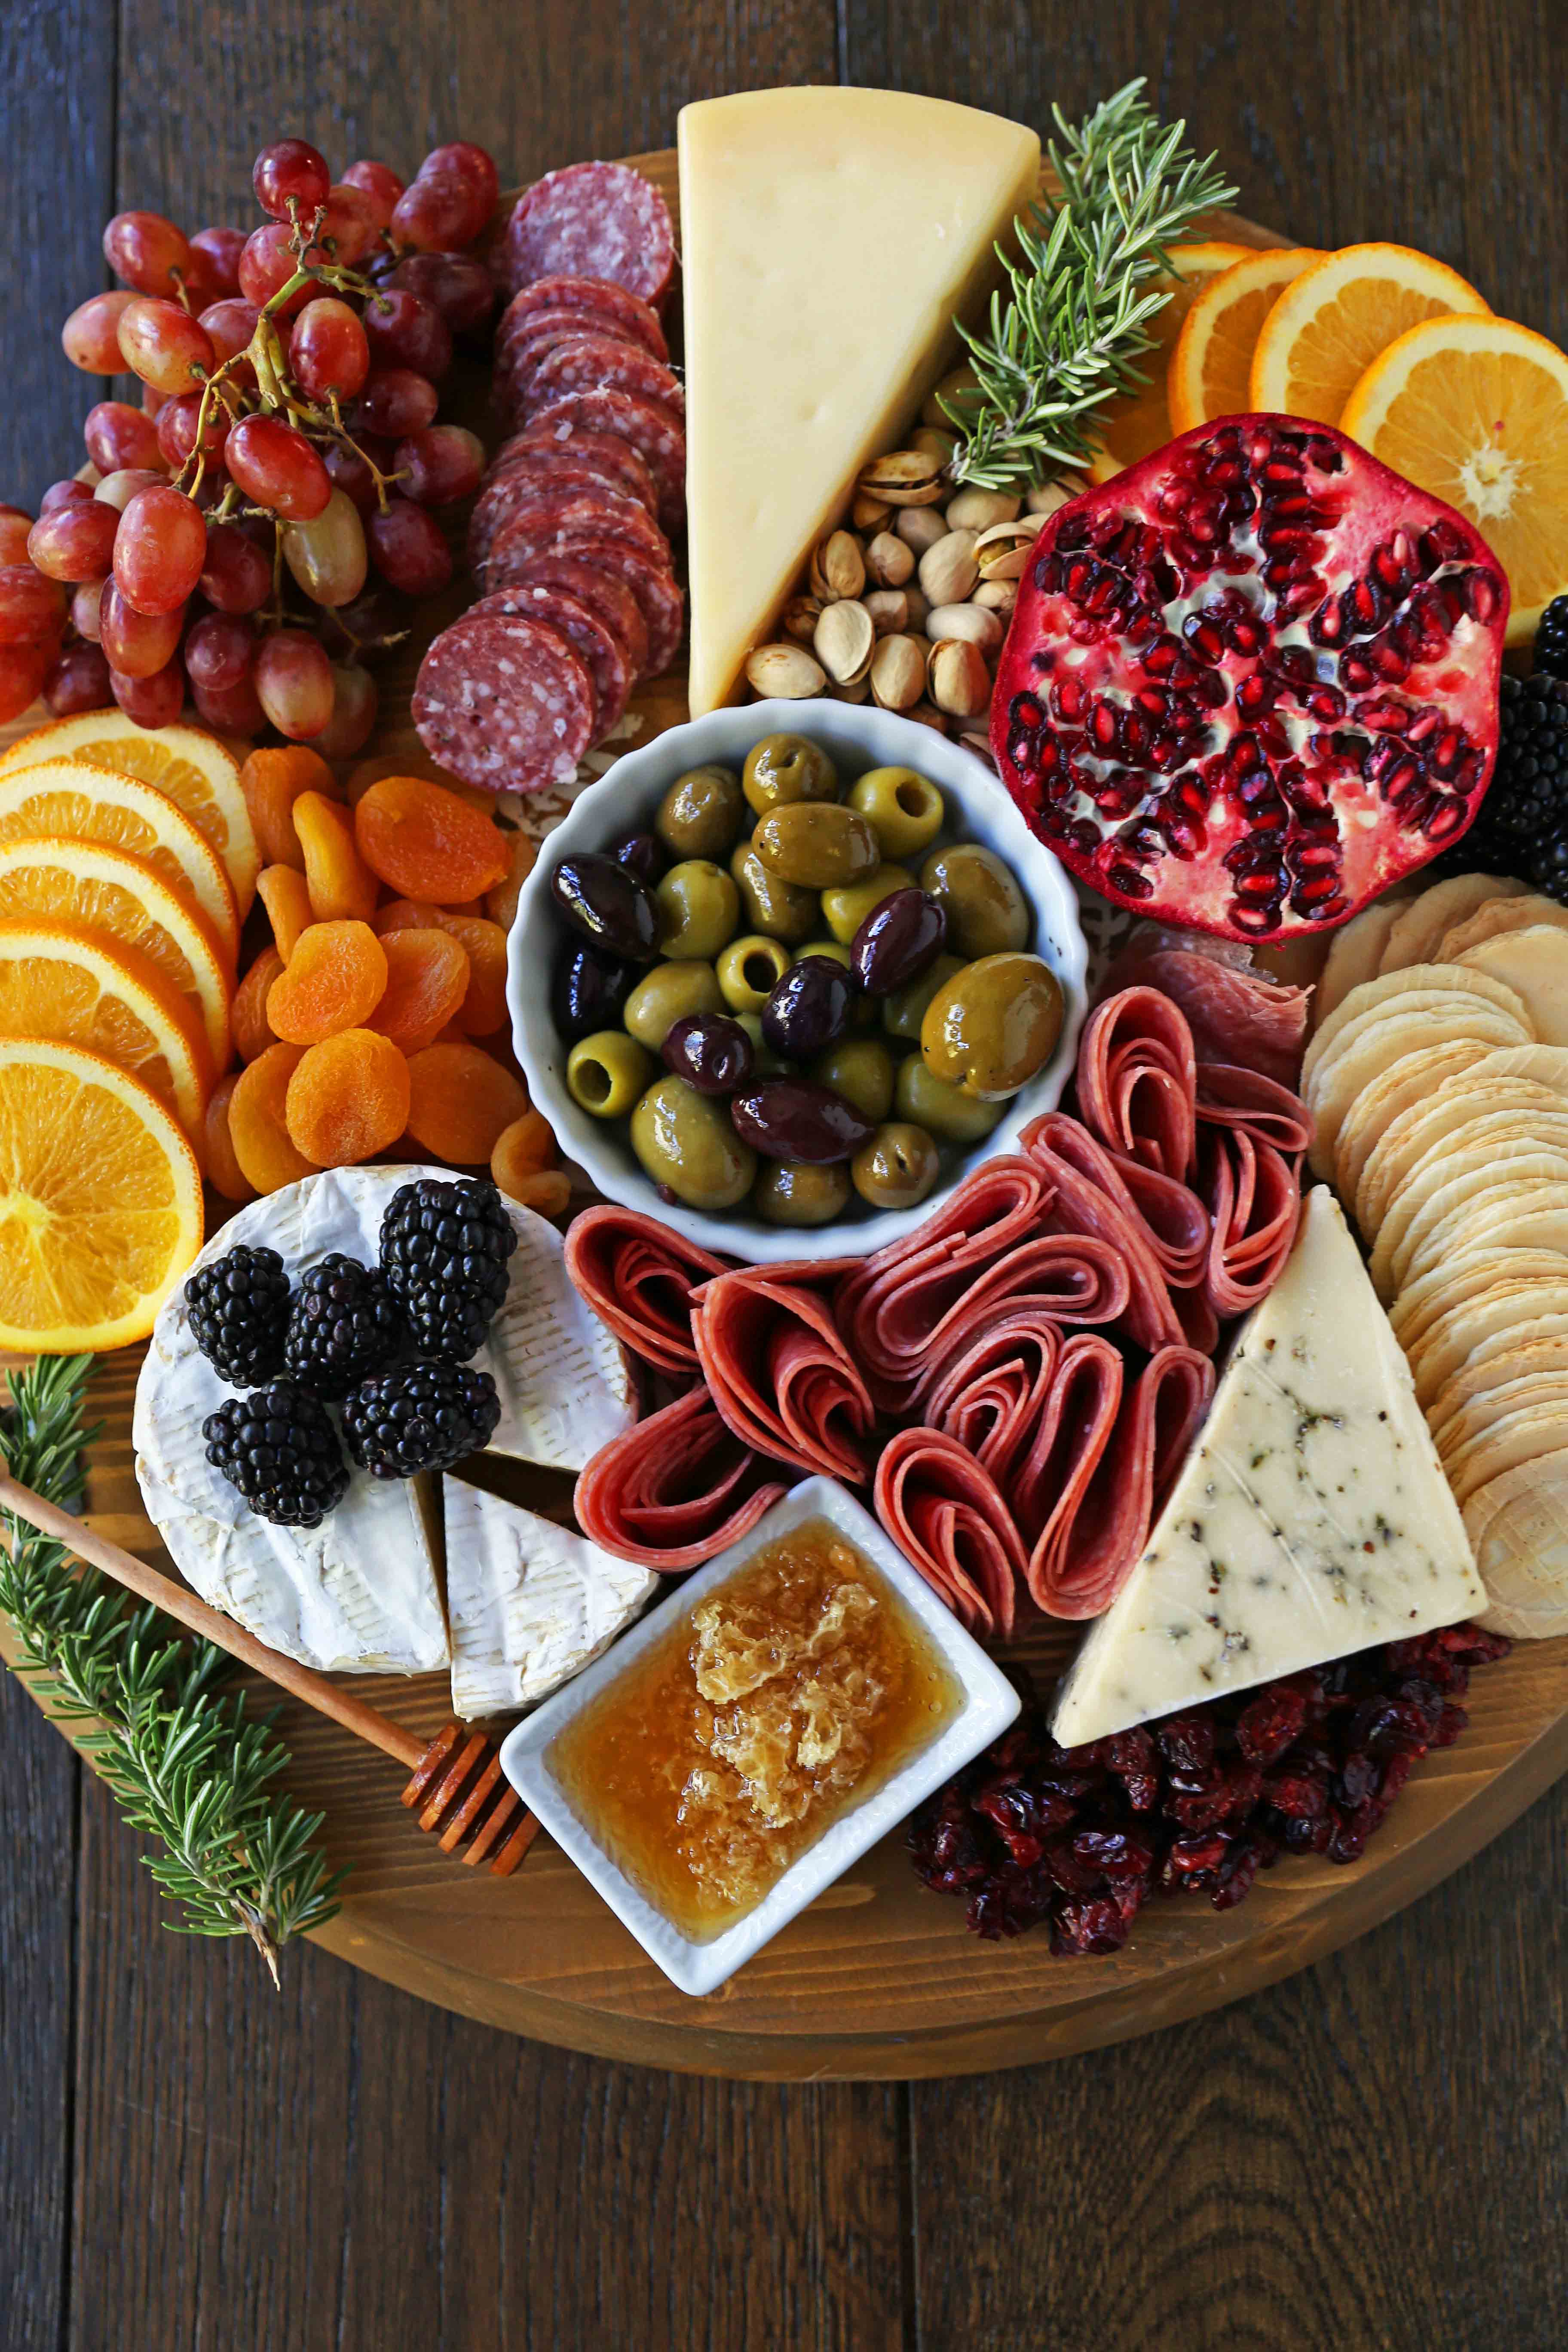 How to make an EPIC Charcuterie Board (AKA Meat and Cheese Platter). How to make a beautiful meat cheese and fruit platter. The perfect appetizer for your next party! www.modernhoney.com #meatboard #meatandcheeseboard #appetizer #appetizers #charcuterieboard #charcuterie #cheeseboard